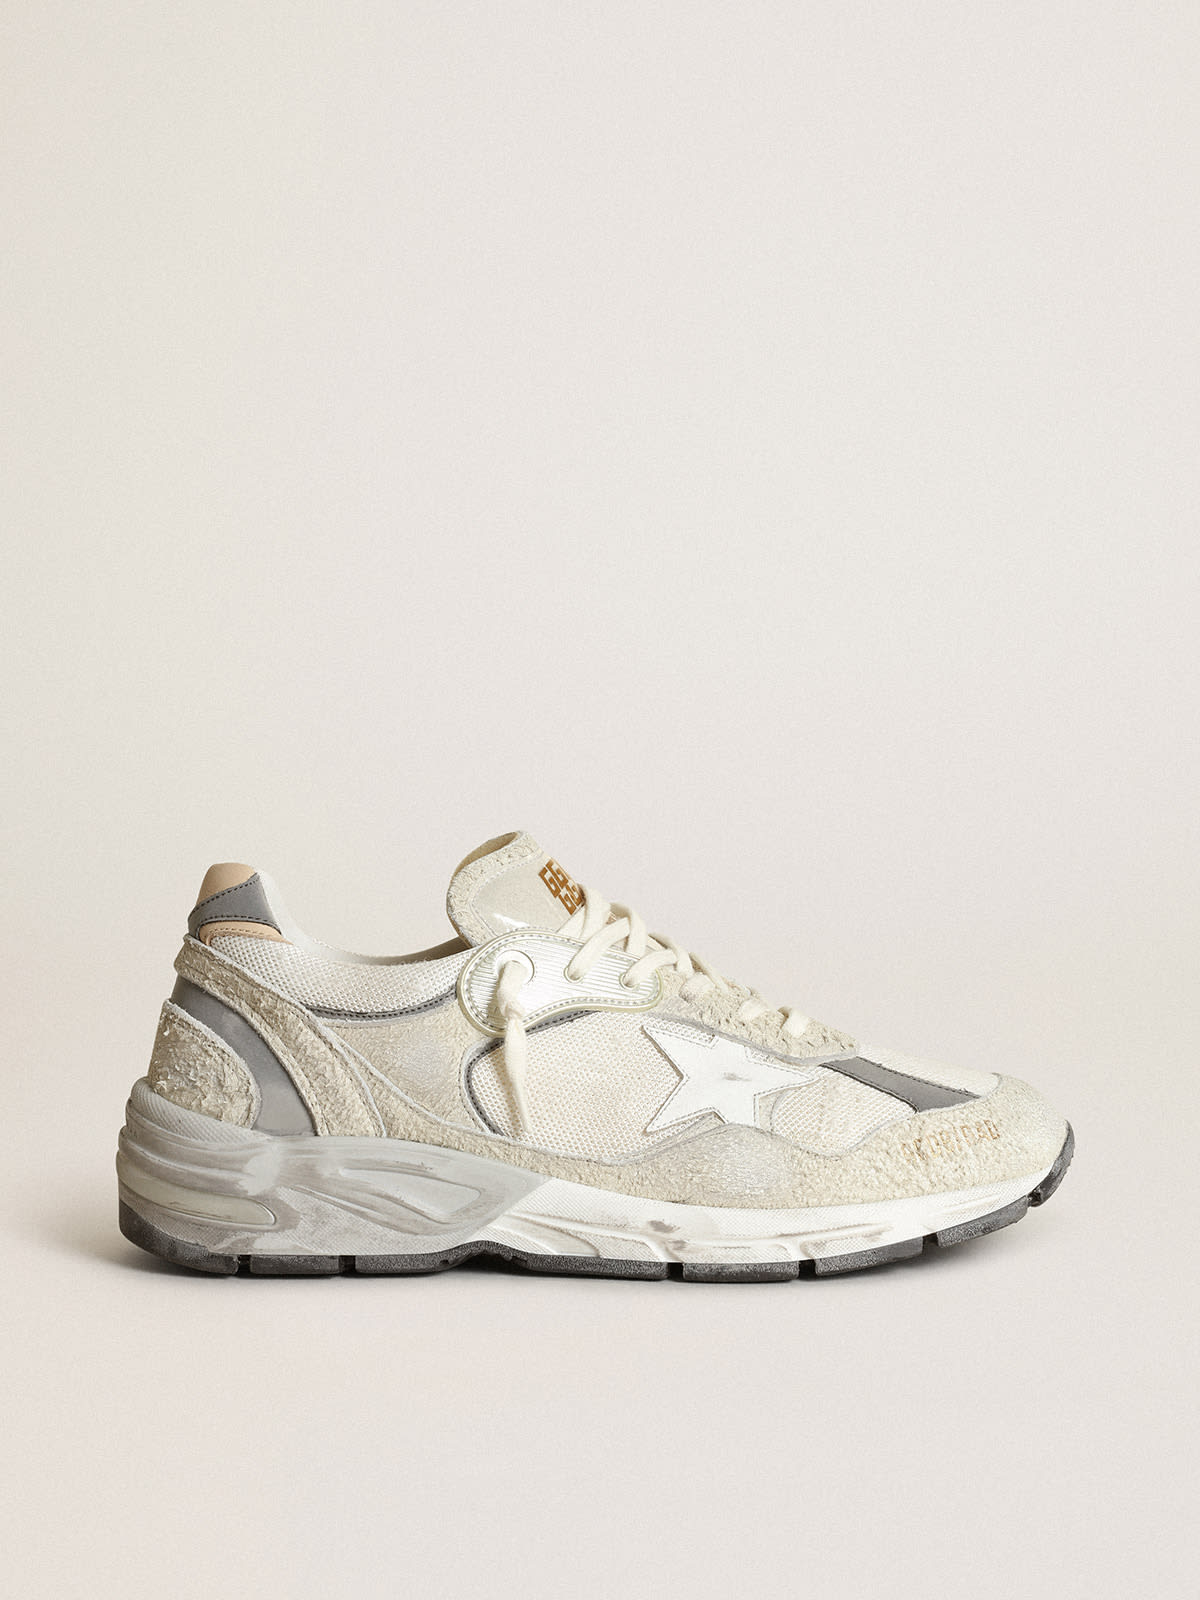 Golden Goose - Dad-Star sneakers in white and gray suede with white leather star in 